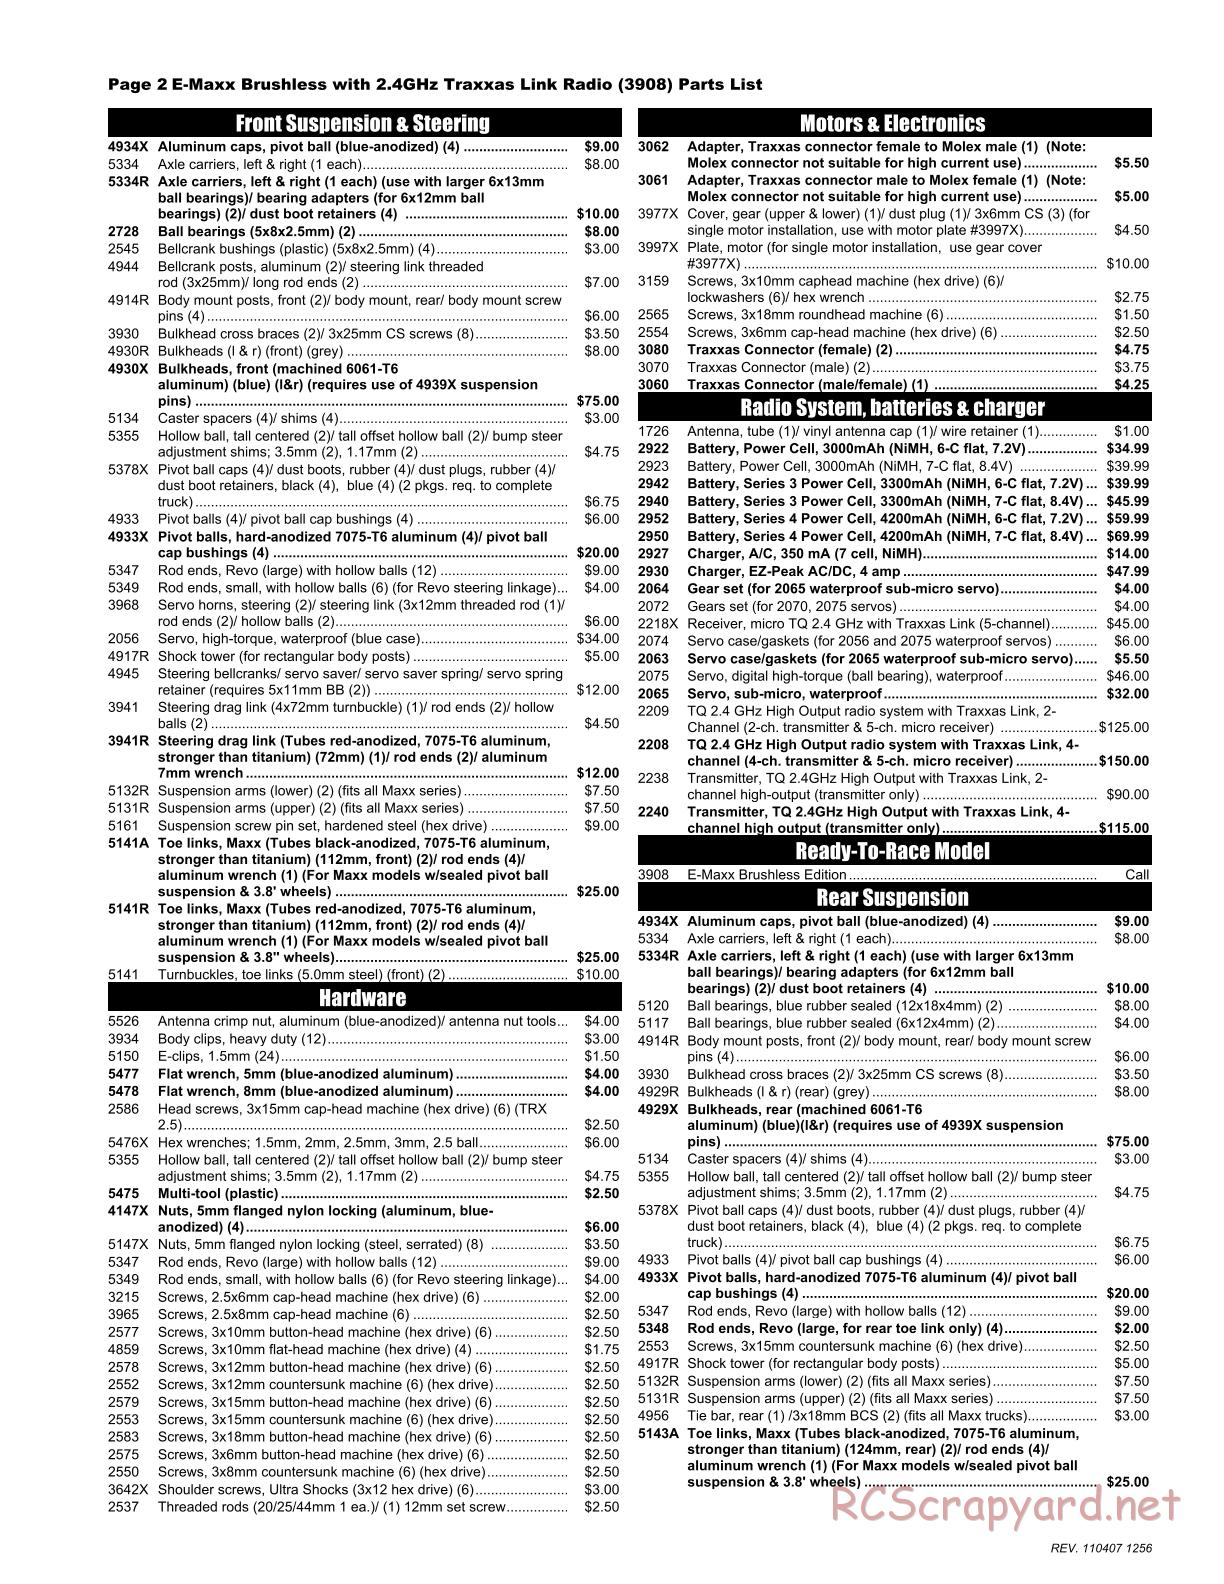 Traxxas - E-Maxx Brushless - Parts List - Page 2